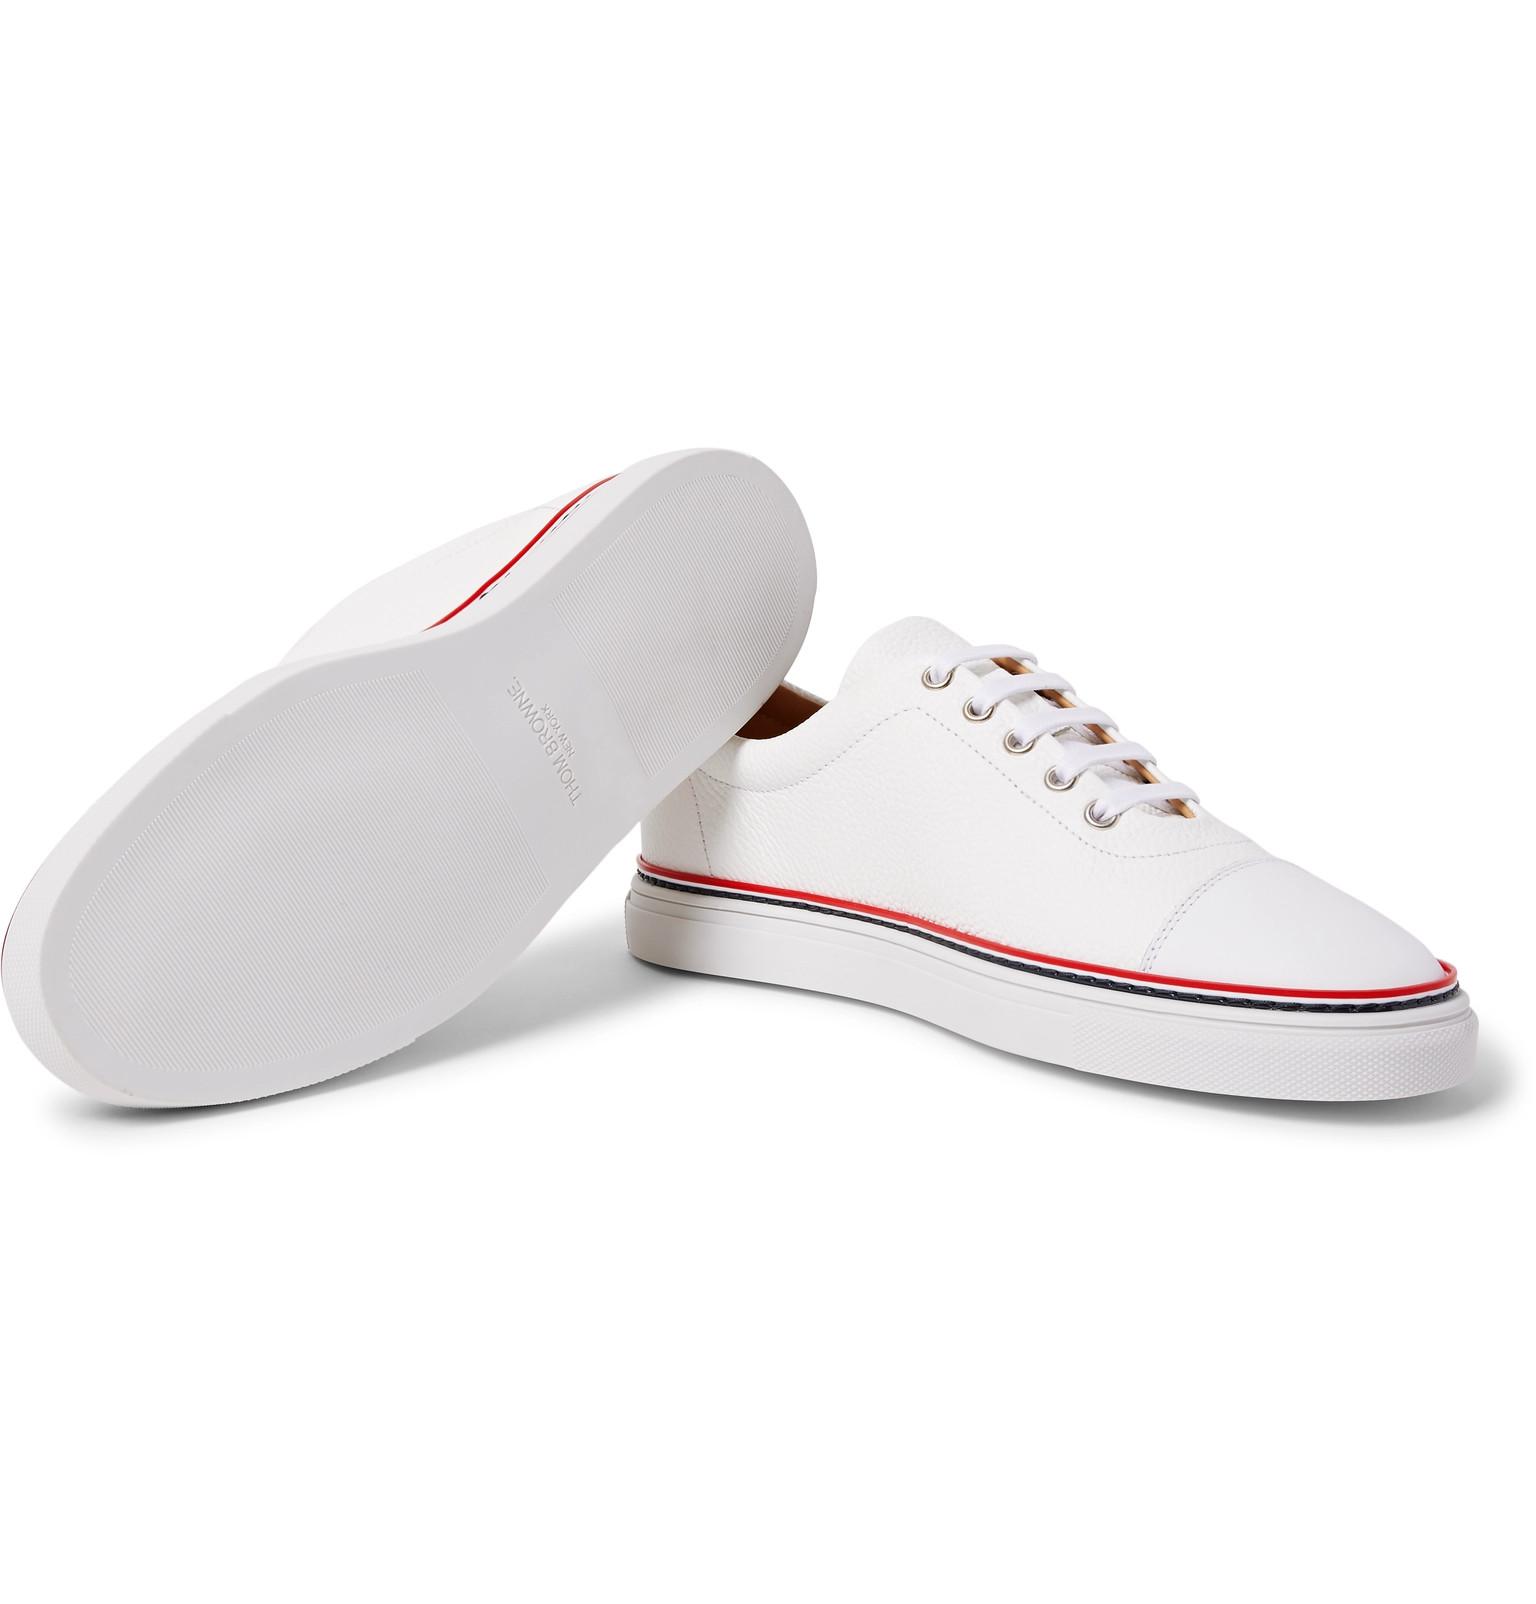 Lyst - Thom Browne Pebble-grain Leather Sneakers in White for Men